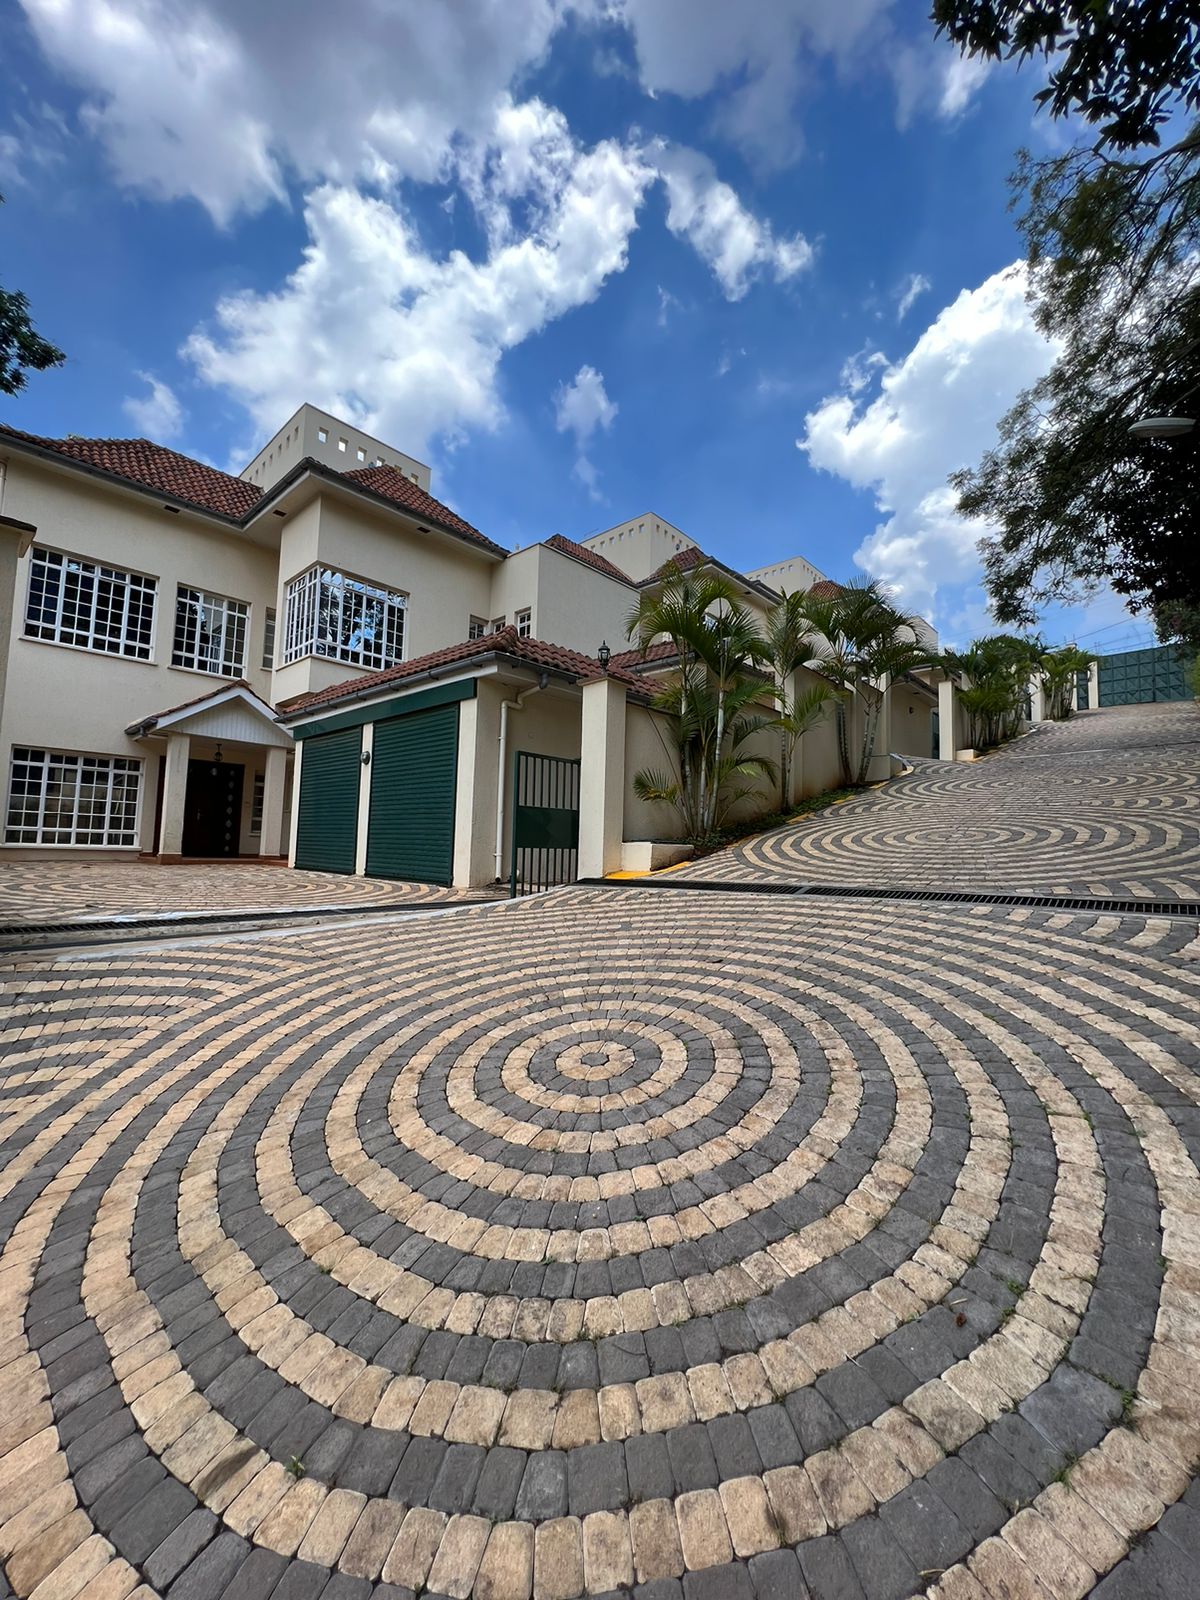 4 bedroom townhouse to let in Kyuna, Nairobi. In a gated community. 6 units in the compound. Rent per month 260,000